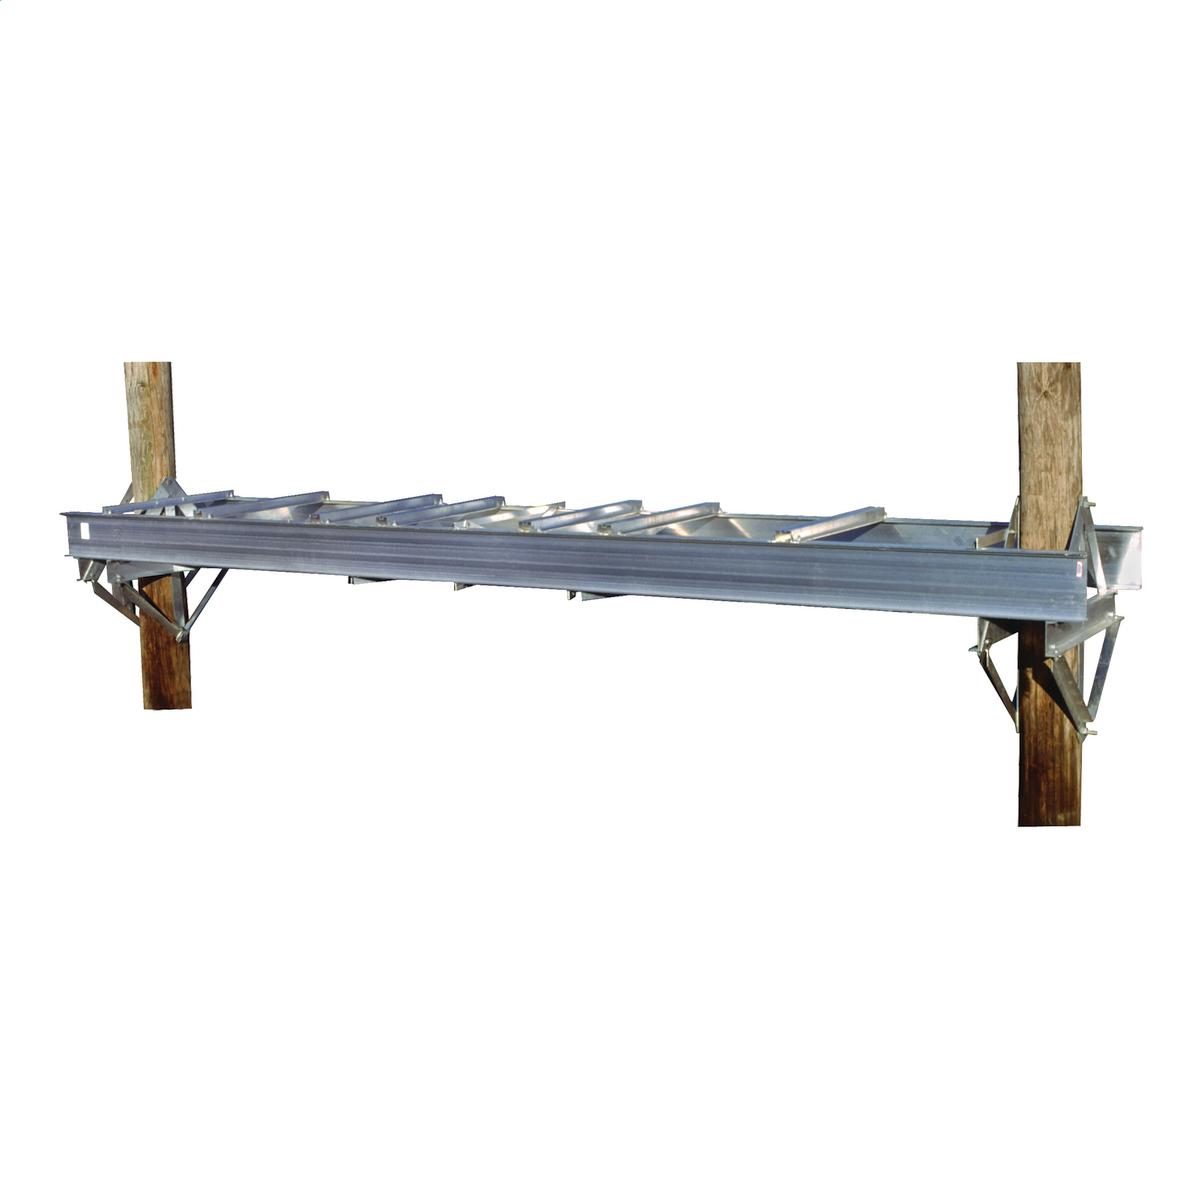 Hubbell CP162 Aluminum regular duty equipment platform with 16' inside pole face to face spacing. The platform width is 42". Platform attaches to poles with eight 3/4" machine bolts (four per side) that are purchased seperately.  ; Aluminum platforms are light-weight b